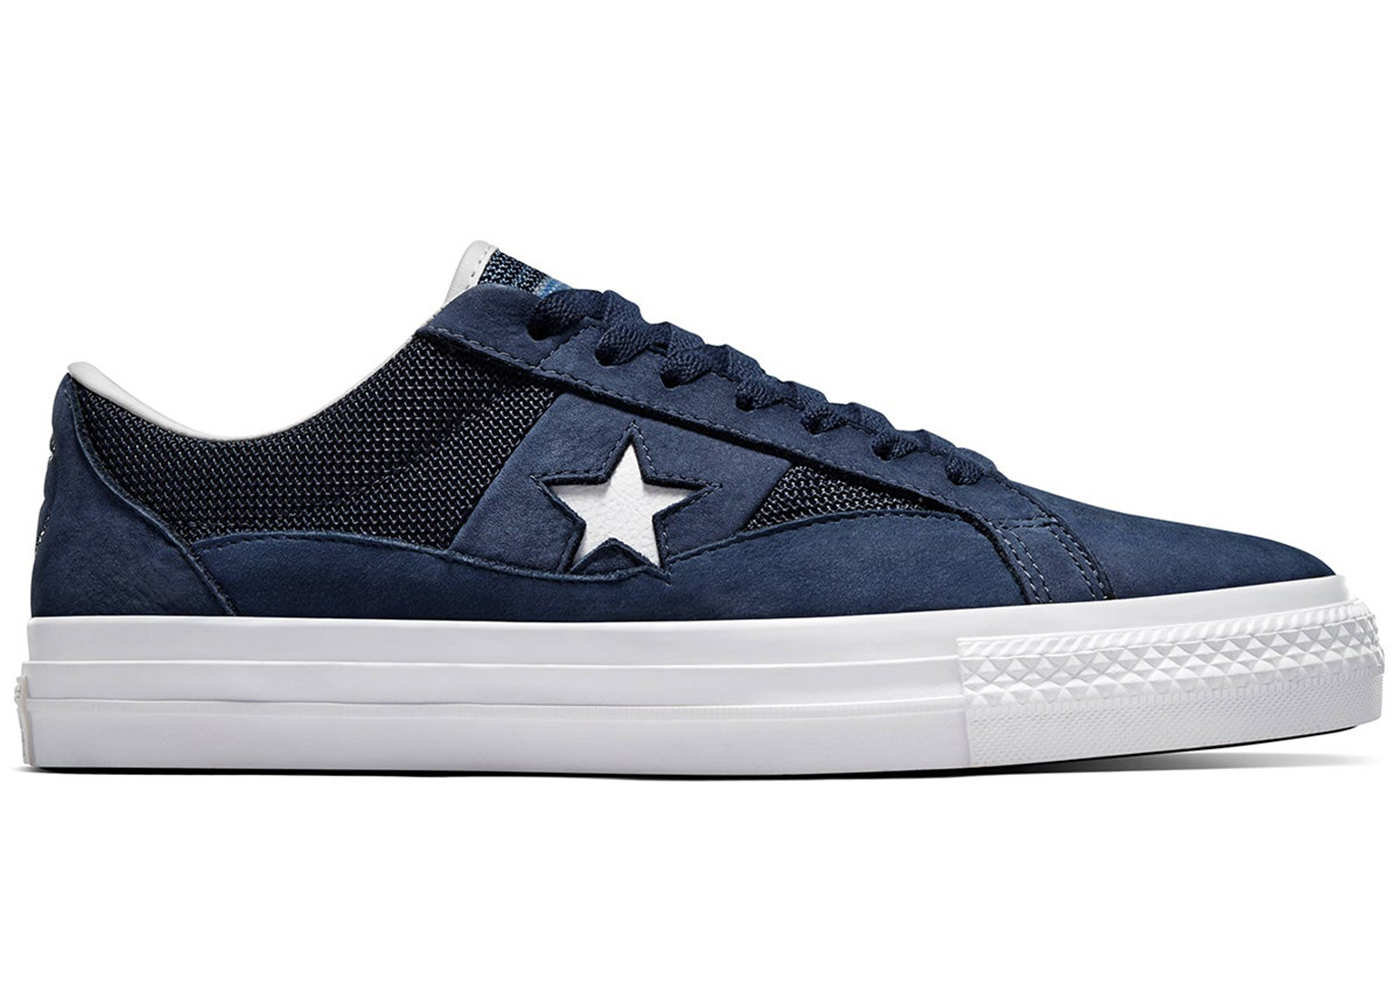 Converse CONS One Star Pro AS Obsidian Men's - 167615C - US